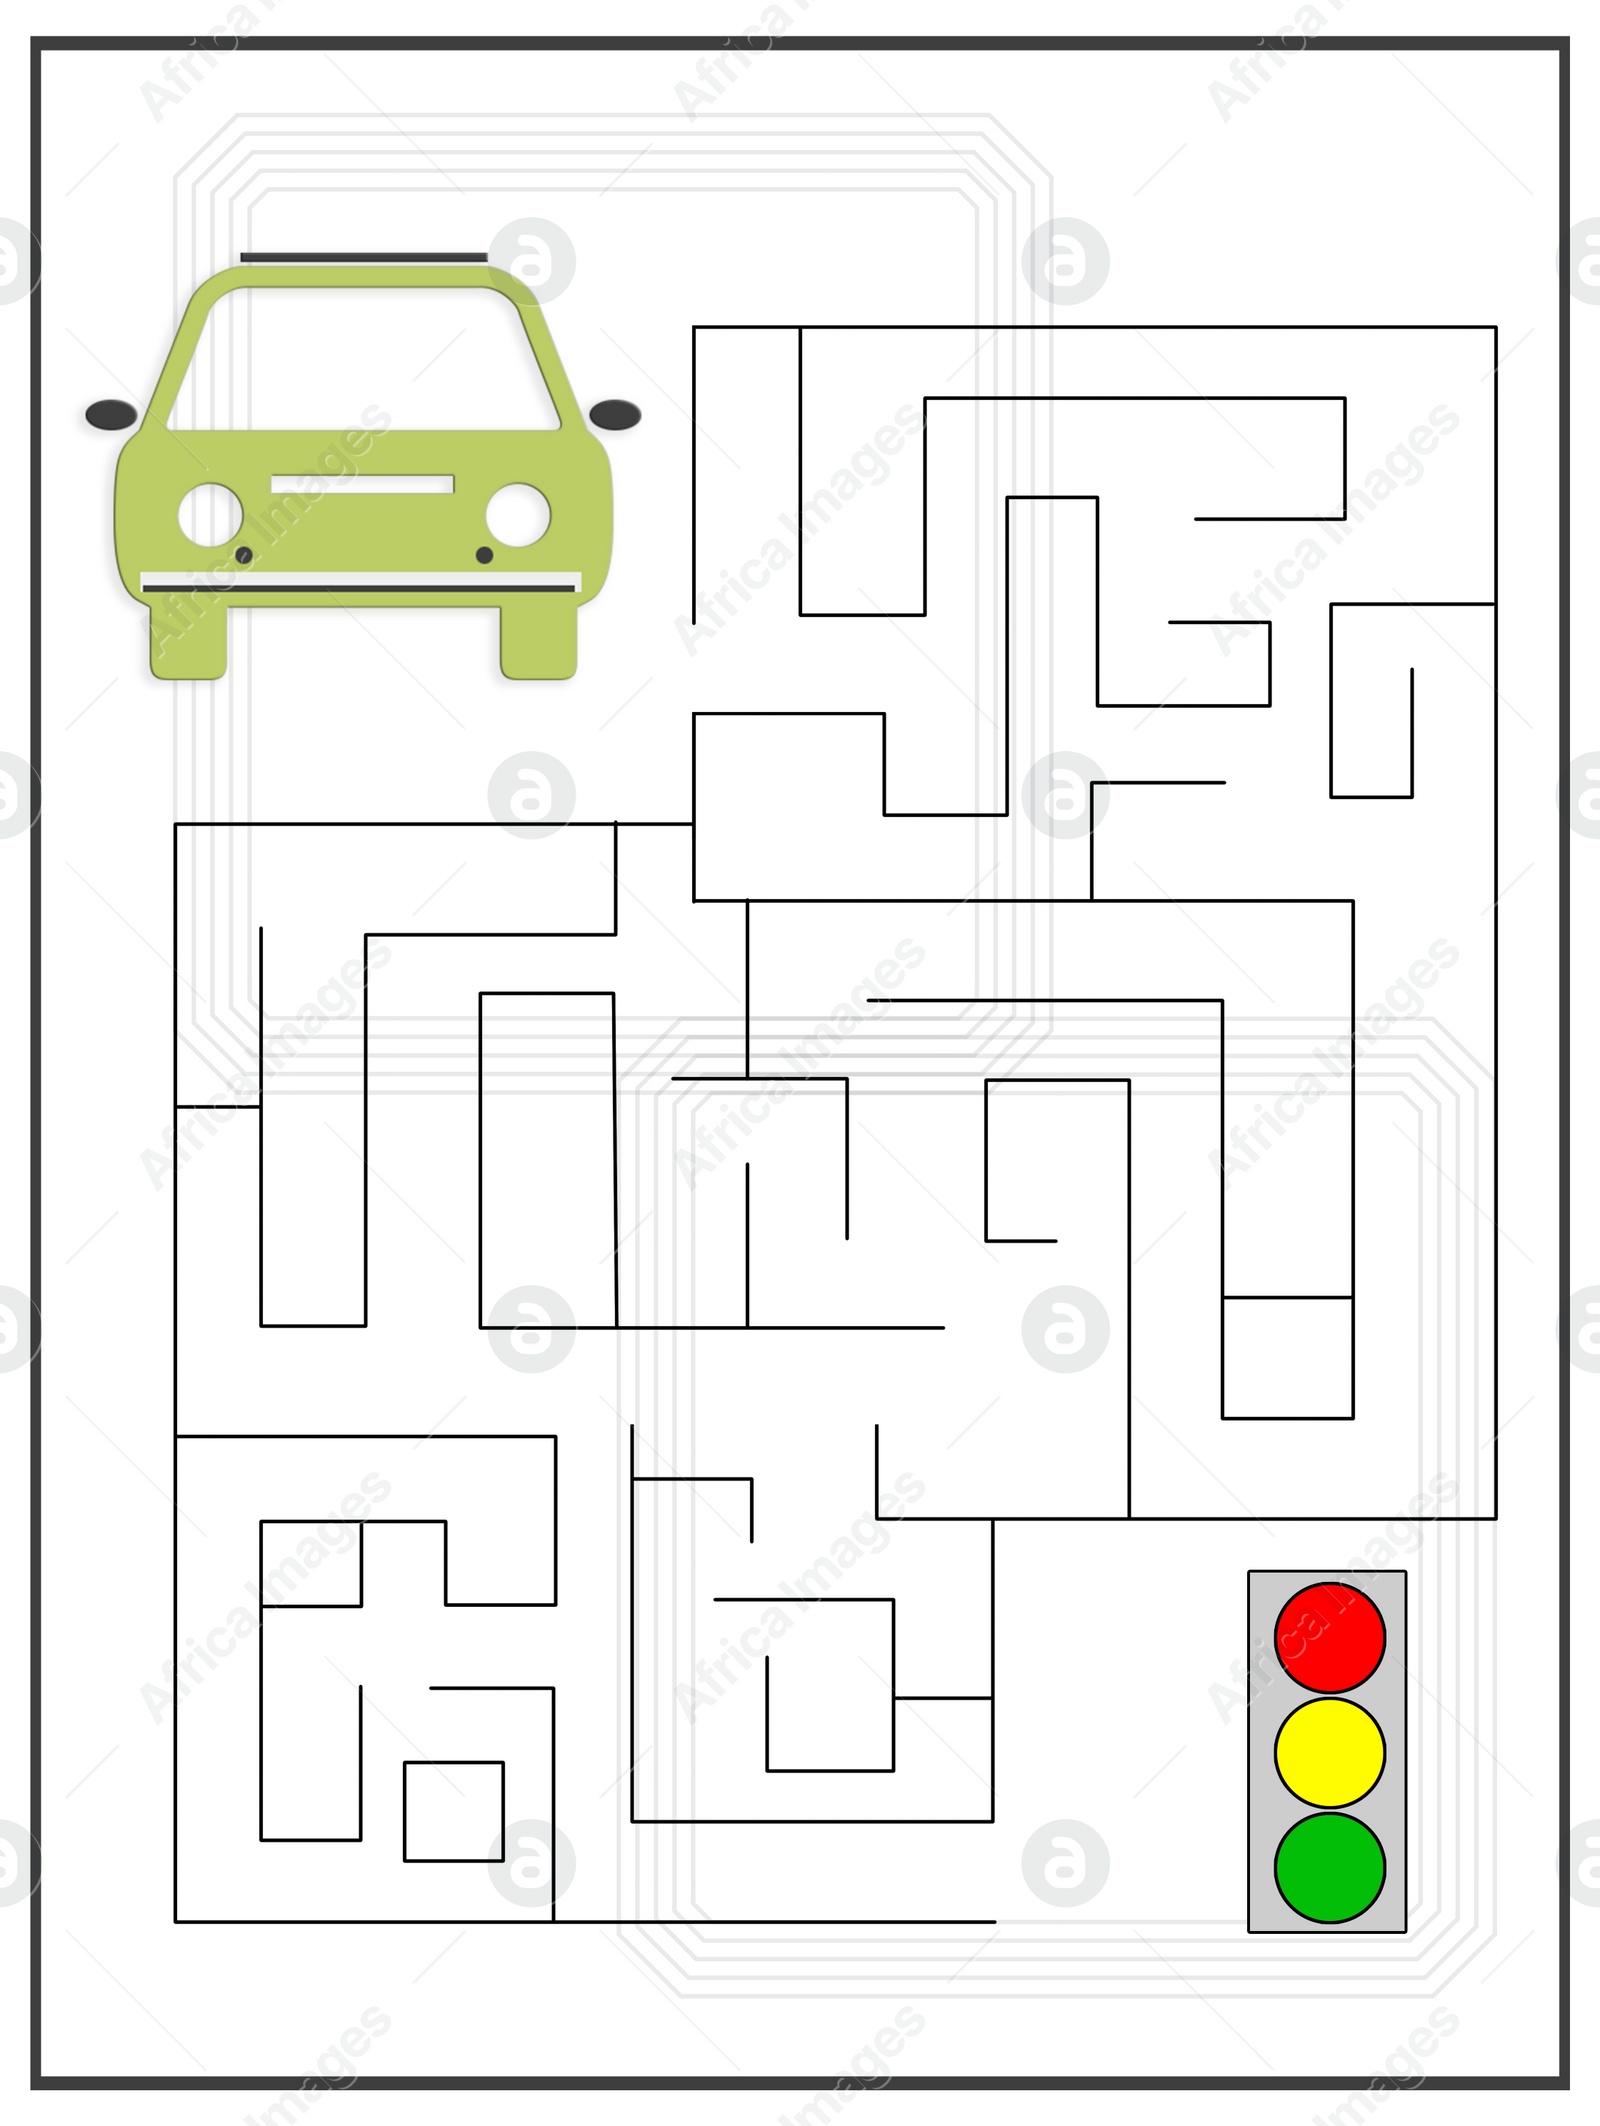 Illustration of Learning game for kids. Labyrinth between car and traffic light, illustration